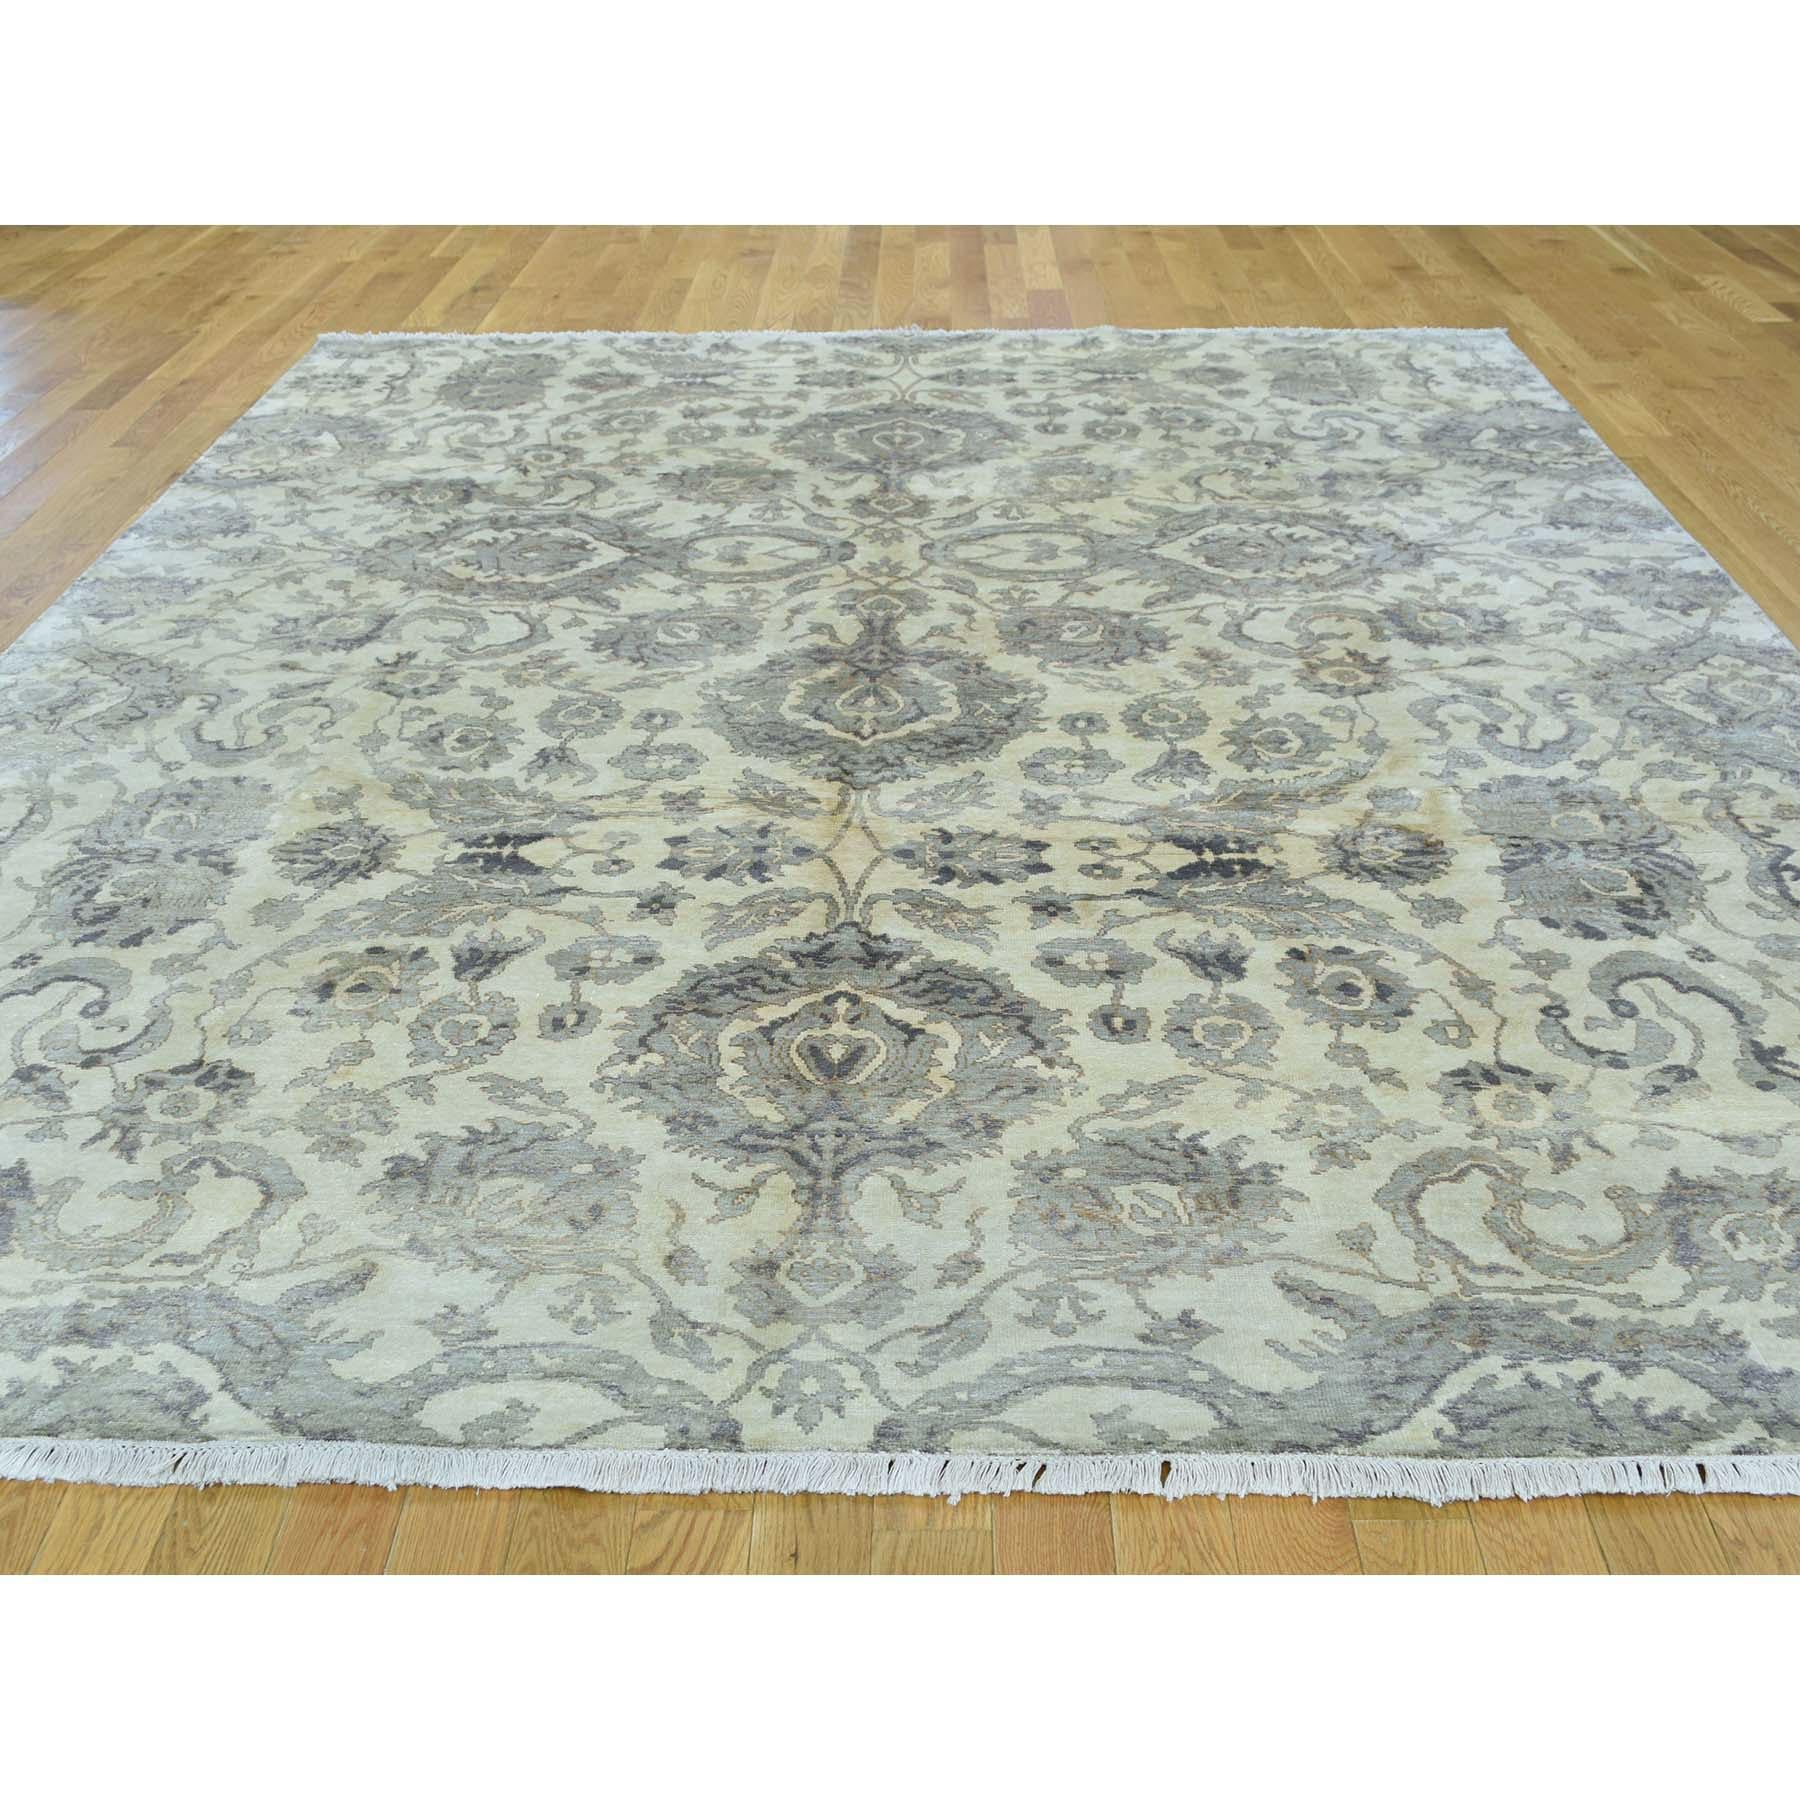 This is a truly genuine one-of-a-kind hand knotted pure silk Agra design Oriental rug. It has been knotted for months and months in the centuries-old Persian weaving craftsmanship techniques by expert artisans. Measures: 8'0